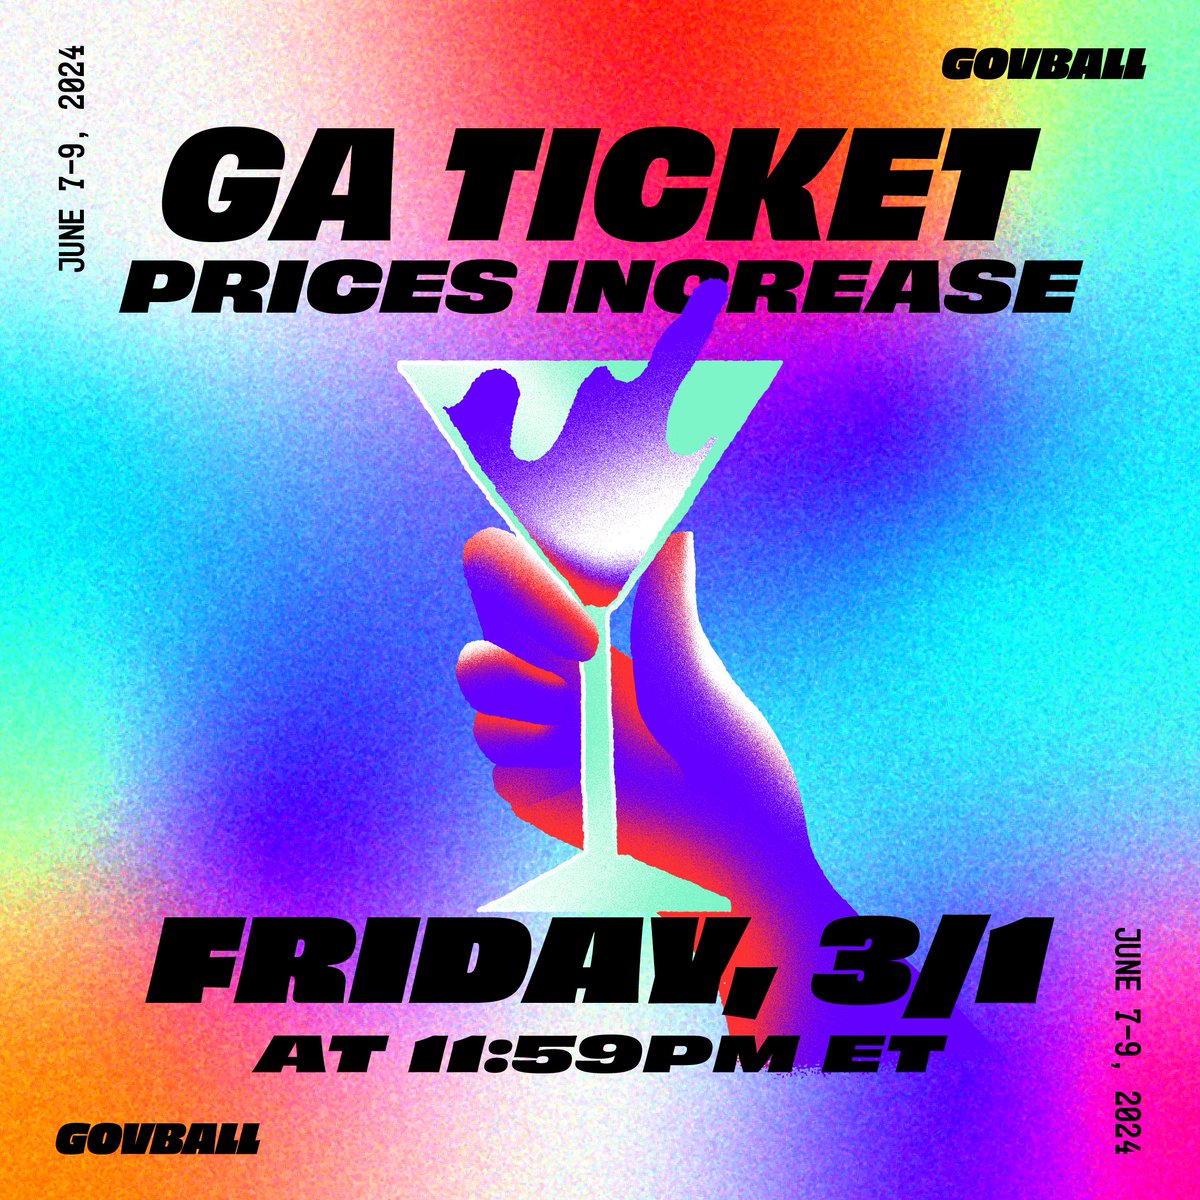 👀 get the lowest price on tix before prices increase this friday night! govball.com